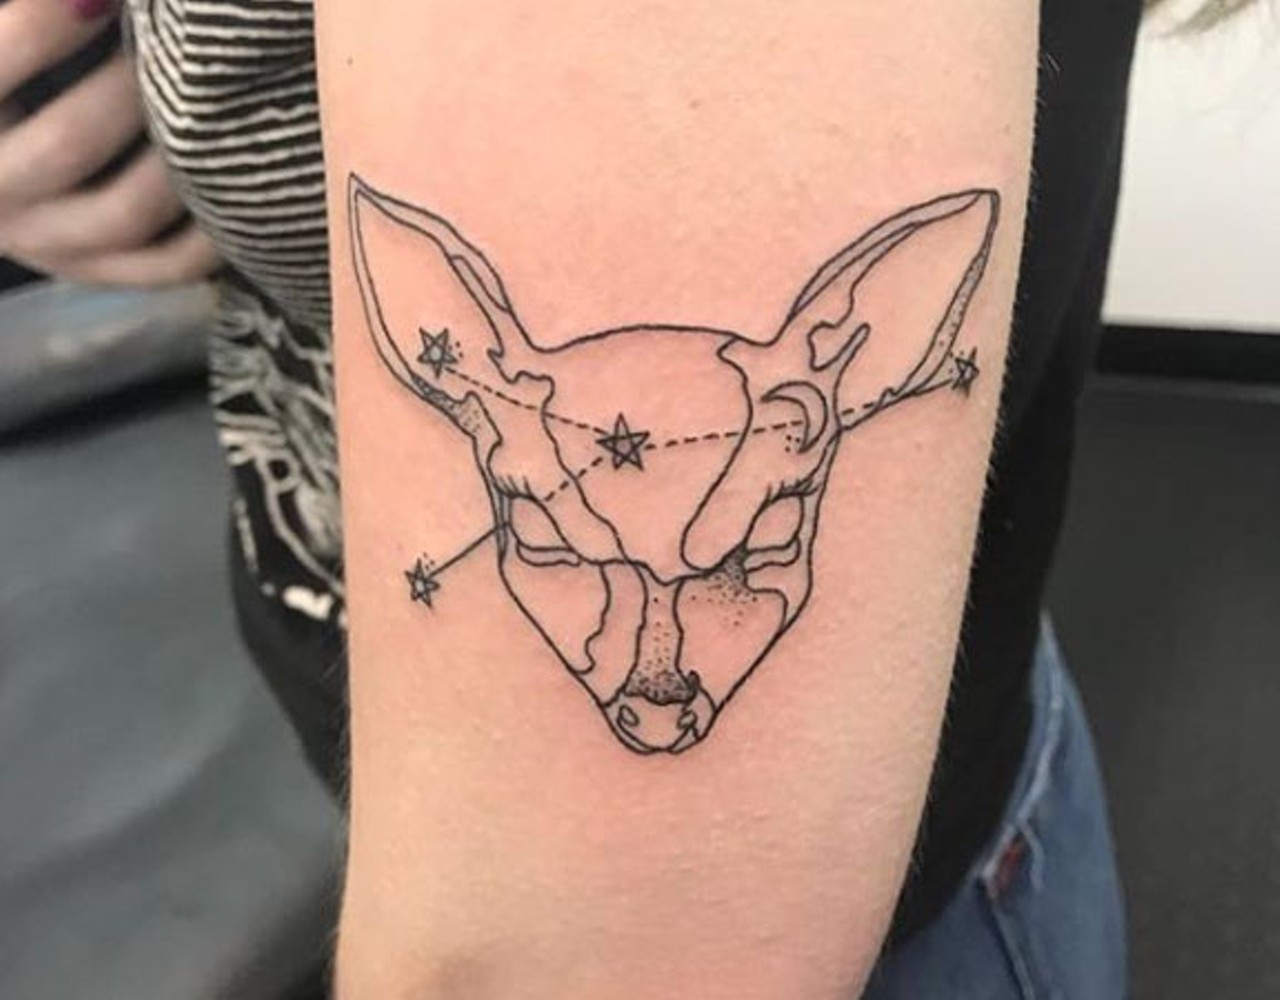 Body Anthology
26751 Brookpark Rd., 440-777-3122
This tattoo and piercing shop offers small and simple tattoos, as well as complex ones. Pictured tattoo by Crystal Harrington, @xecksdeed
Photo via bodyanthology/Instagram